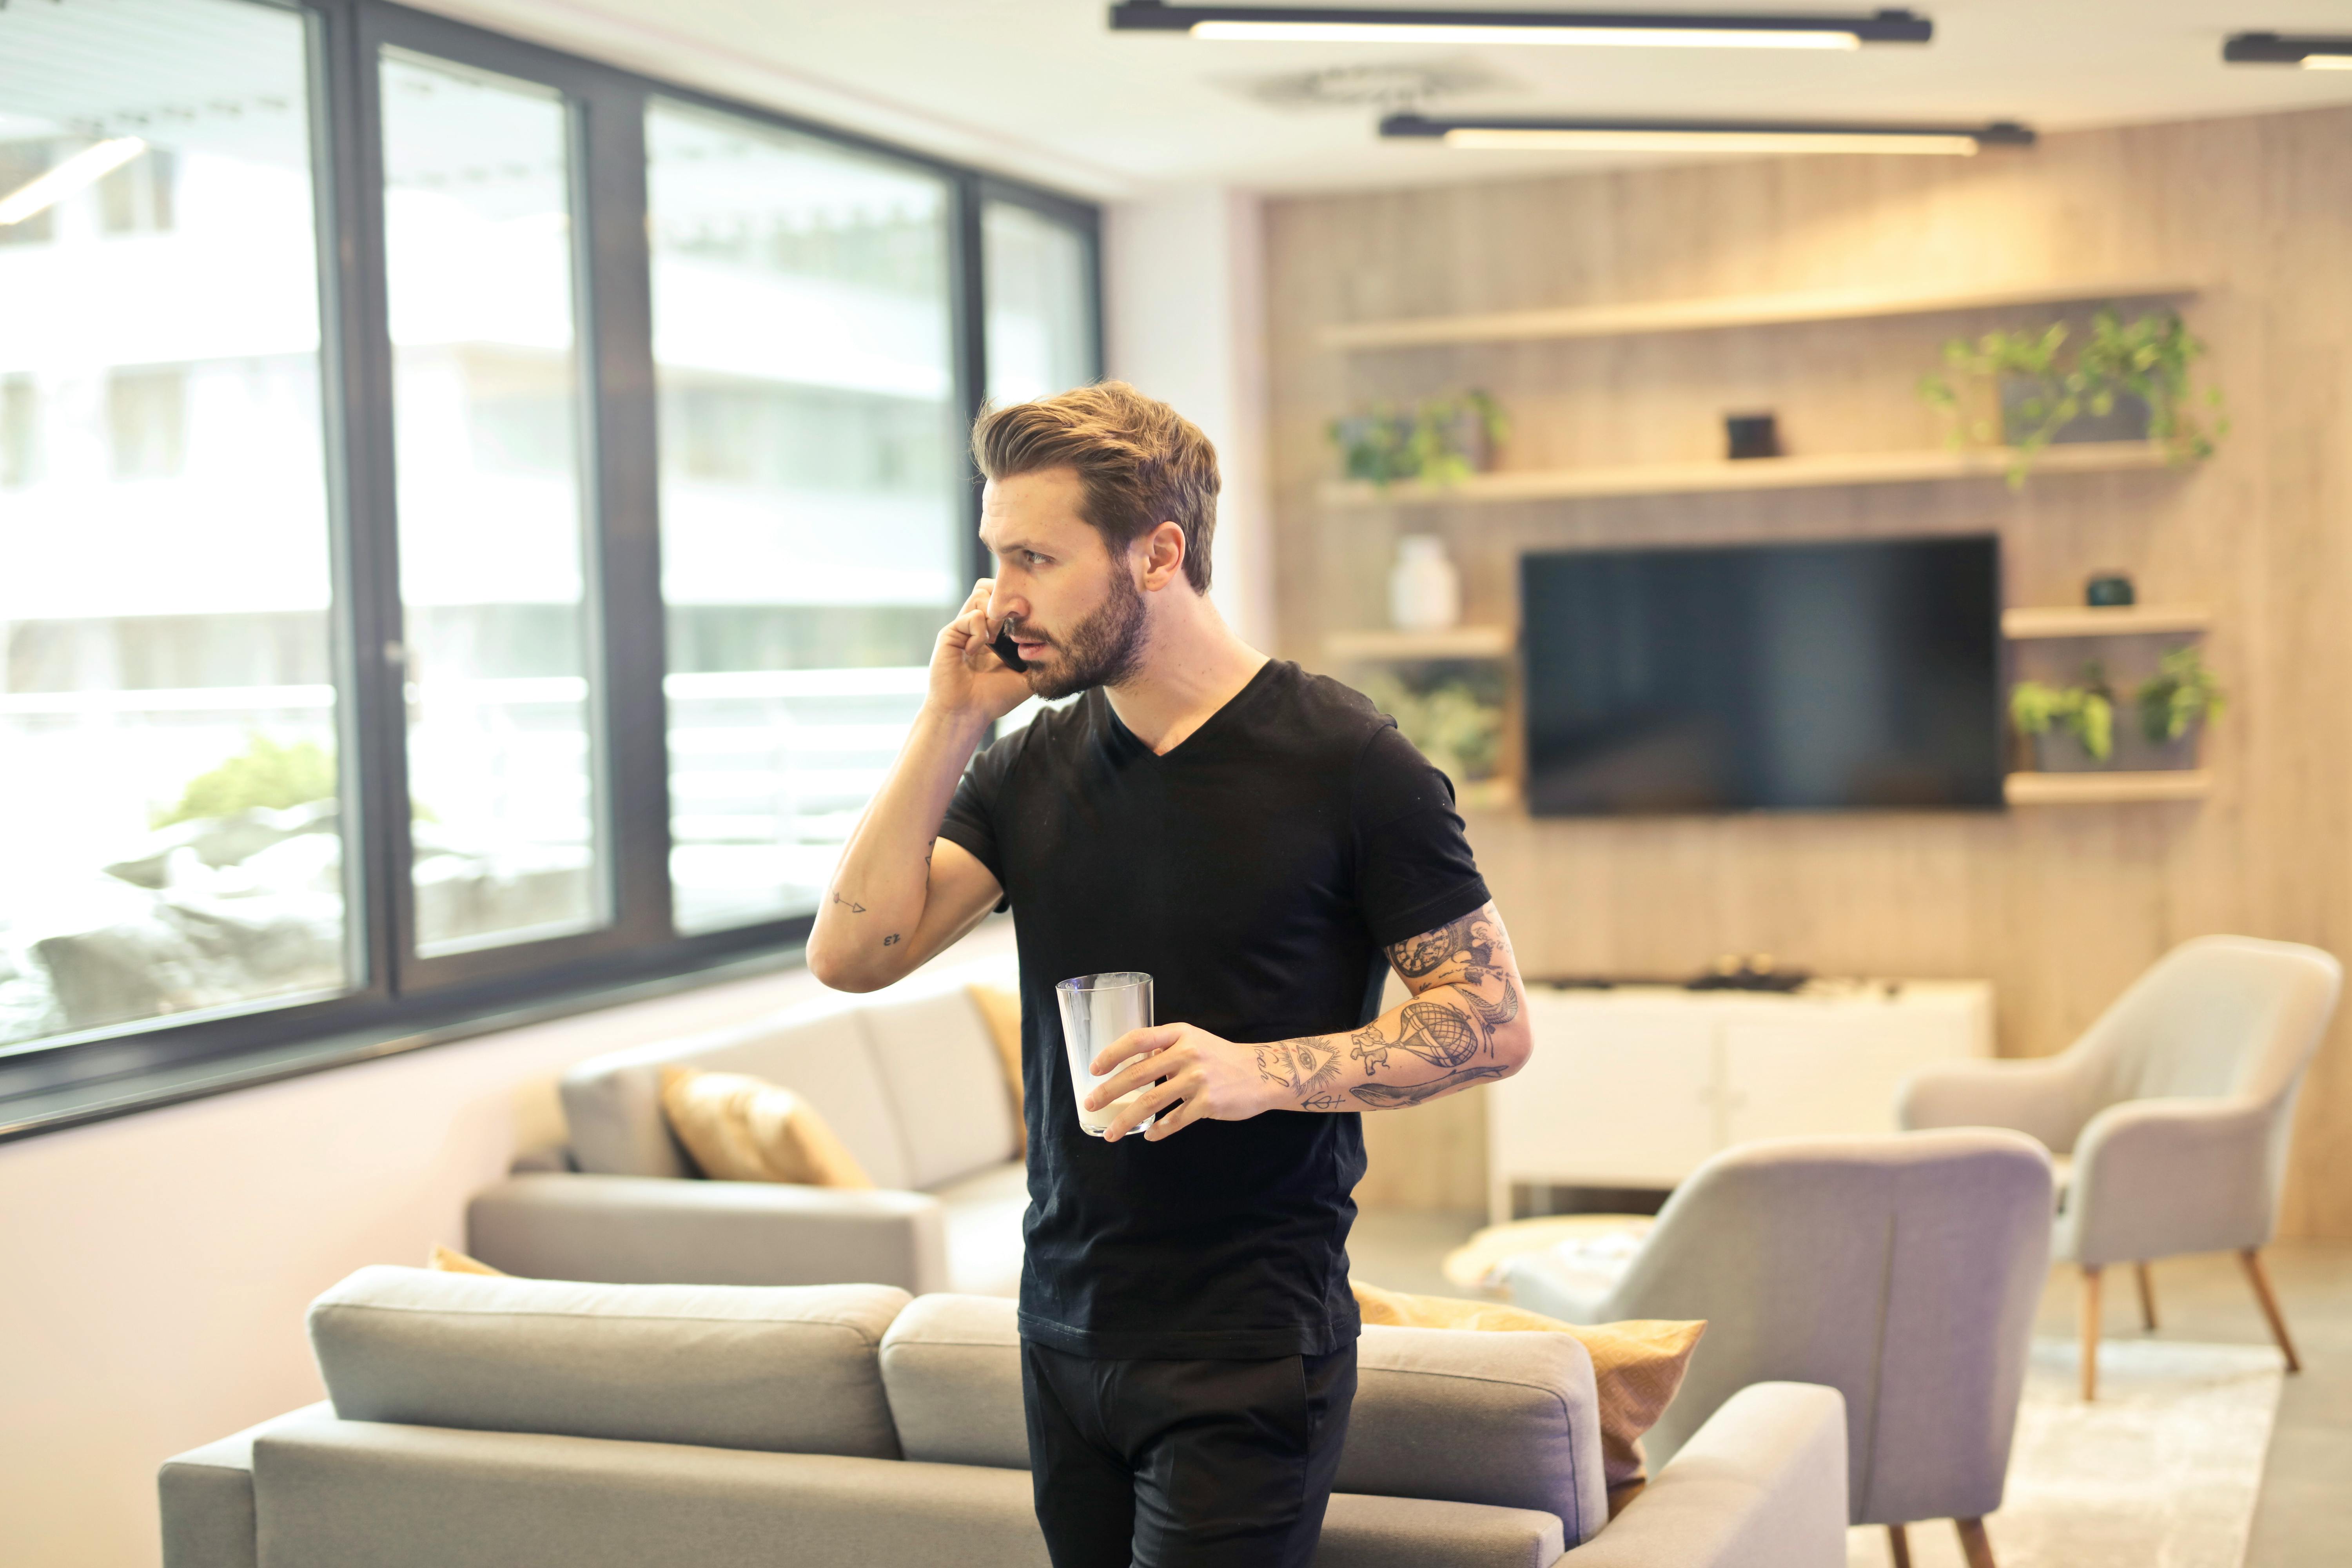 A man holding a beverage while talking on the phone | Source: Pexels